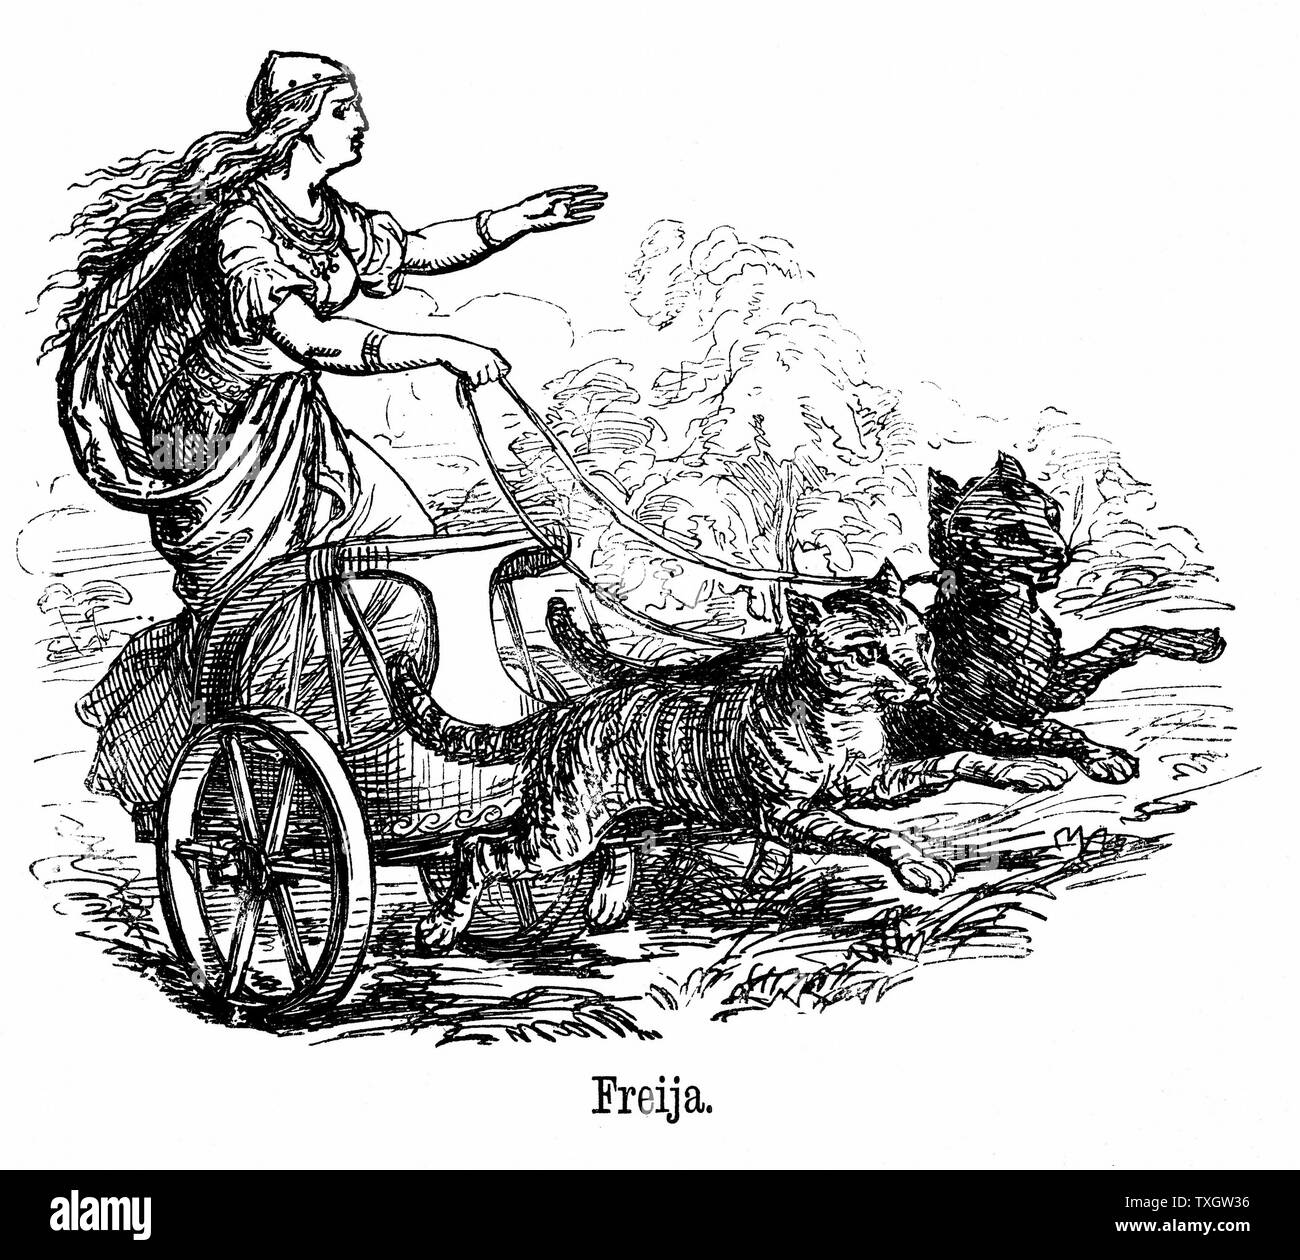 Freya or Frigg goddess of love in Scandinavian mythology, wife of Wotan or Odin, driving her chariot pulled by cats Friday is named for her Engraving Stock Photo